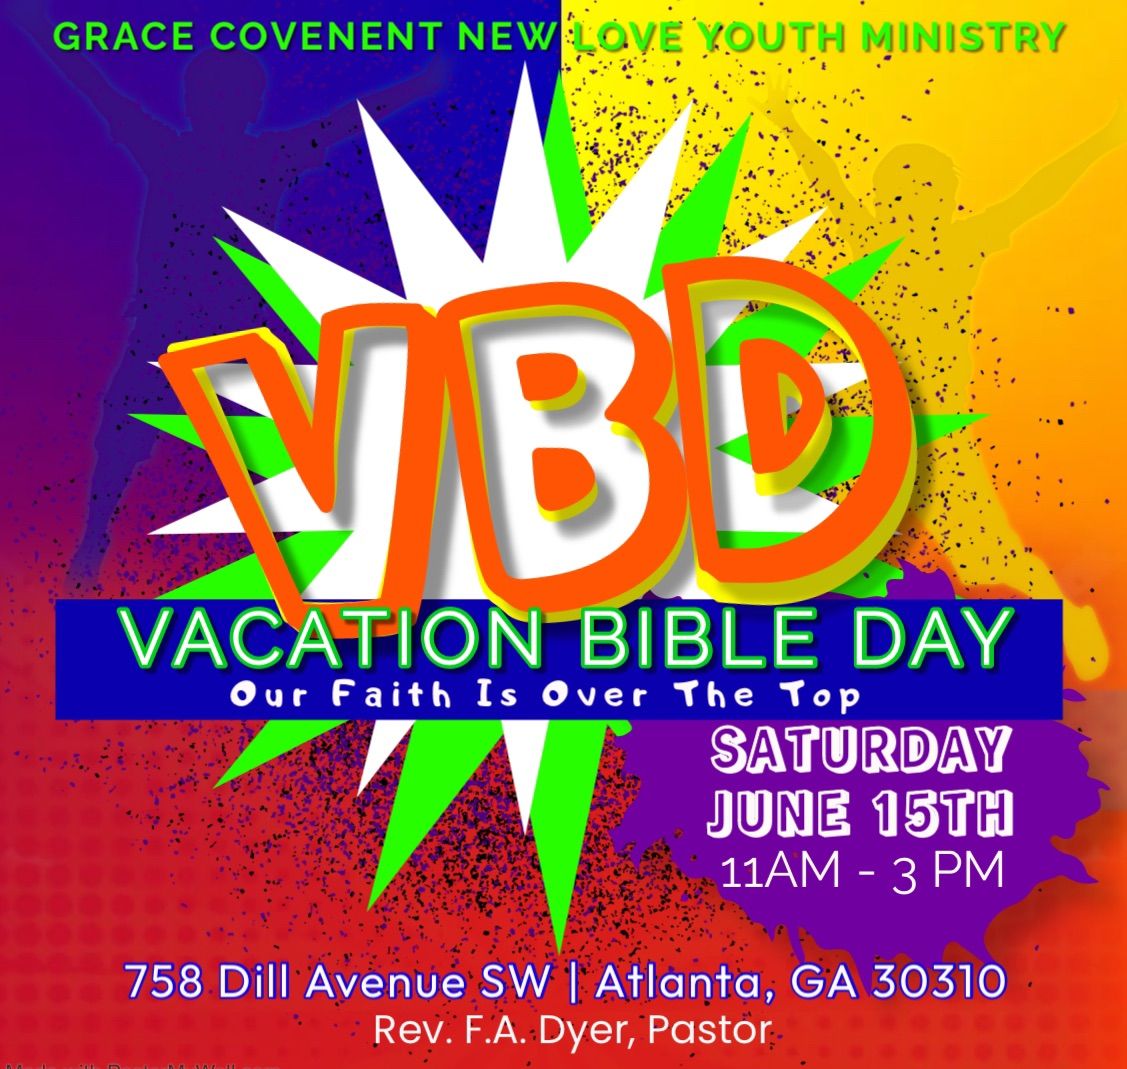 YOUTH VACATION BIBLE DAY